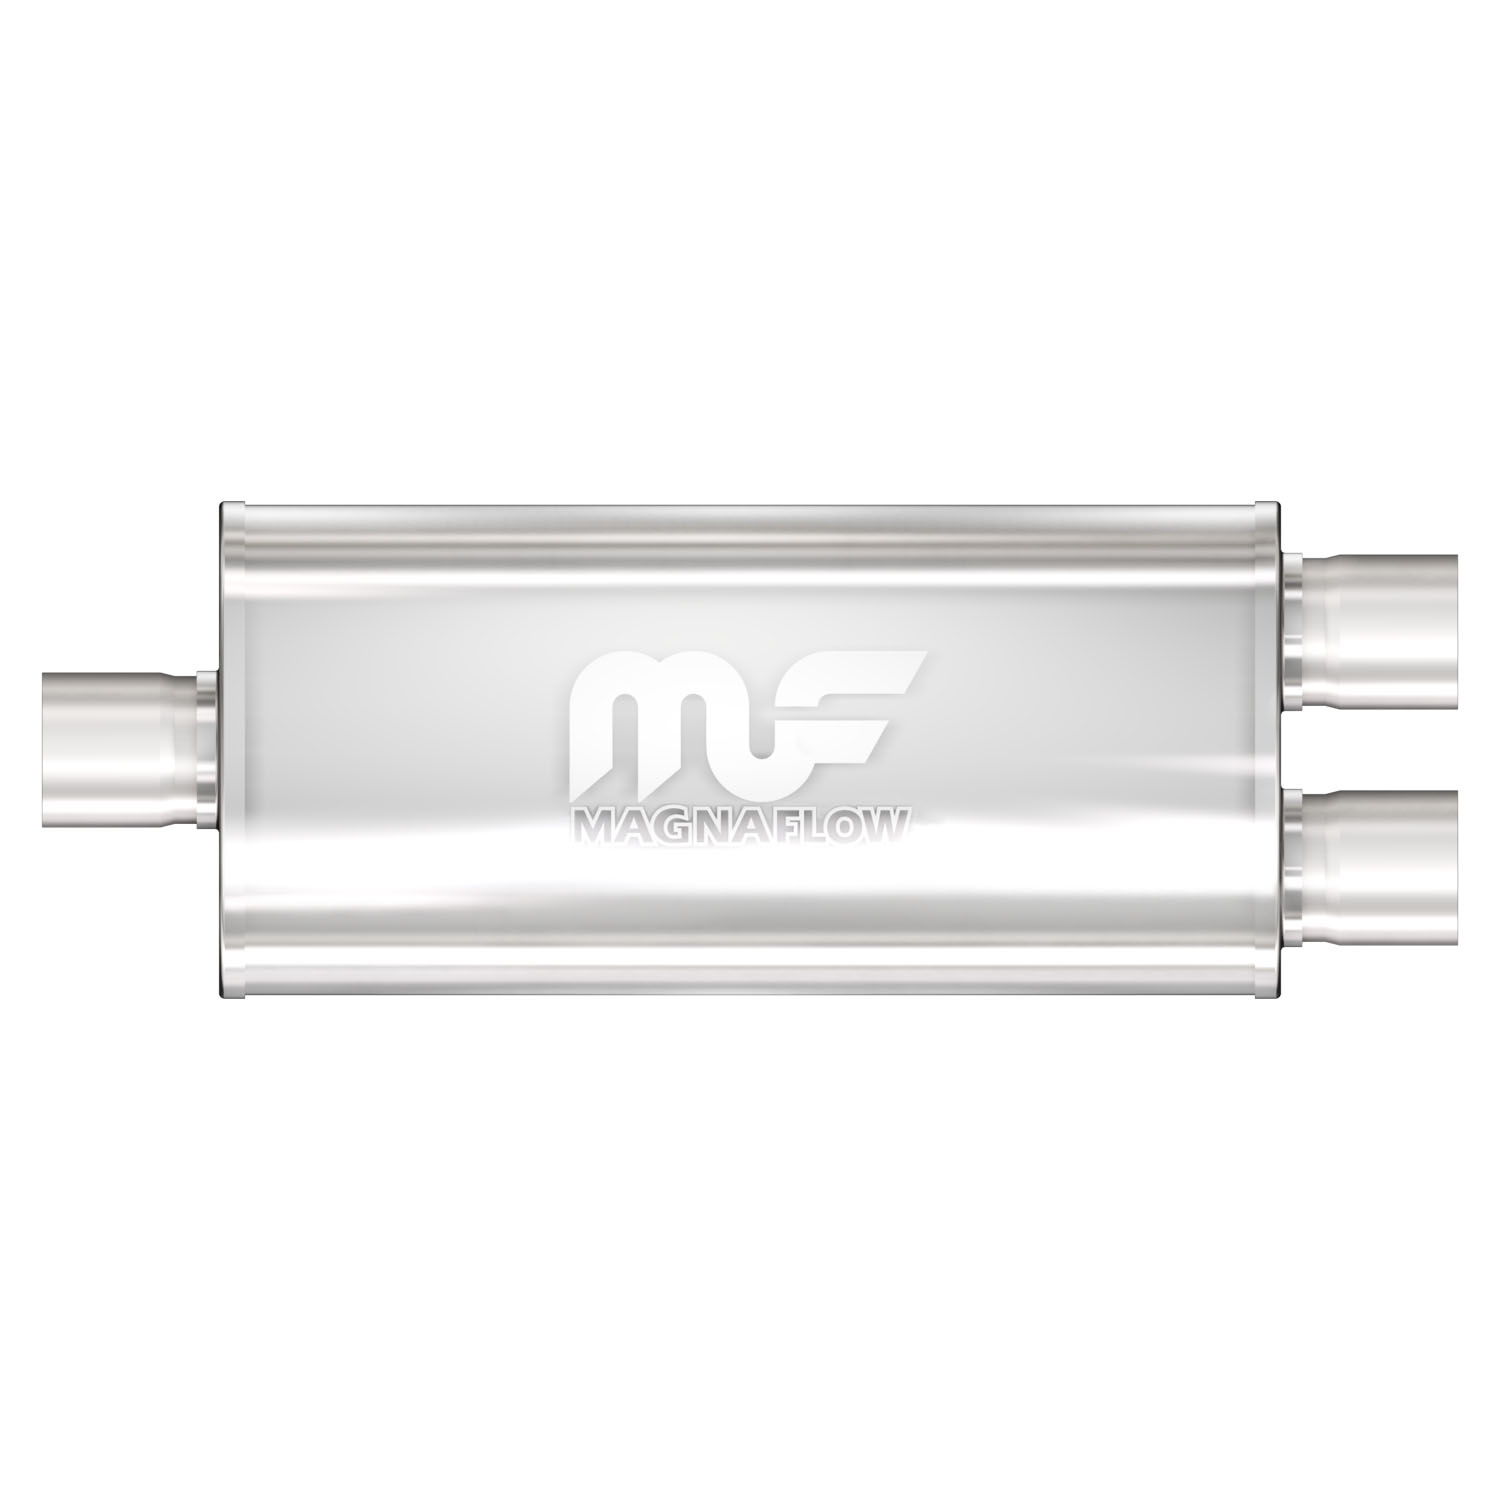 5" x 8" Oval Muffler Center In/Dual Out: 2"/2" Body Length: 14" Overall Length: 20" Core Size: 2.5" Polished Finish